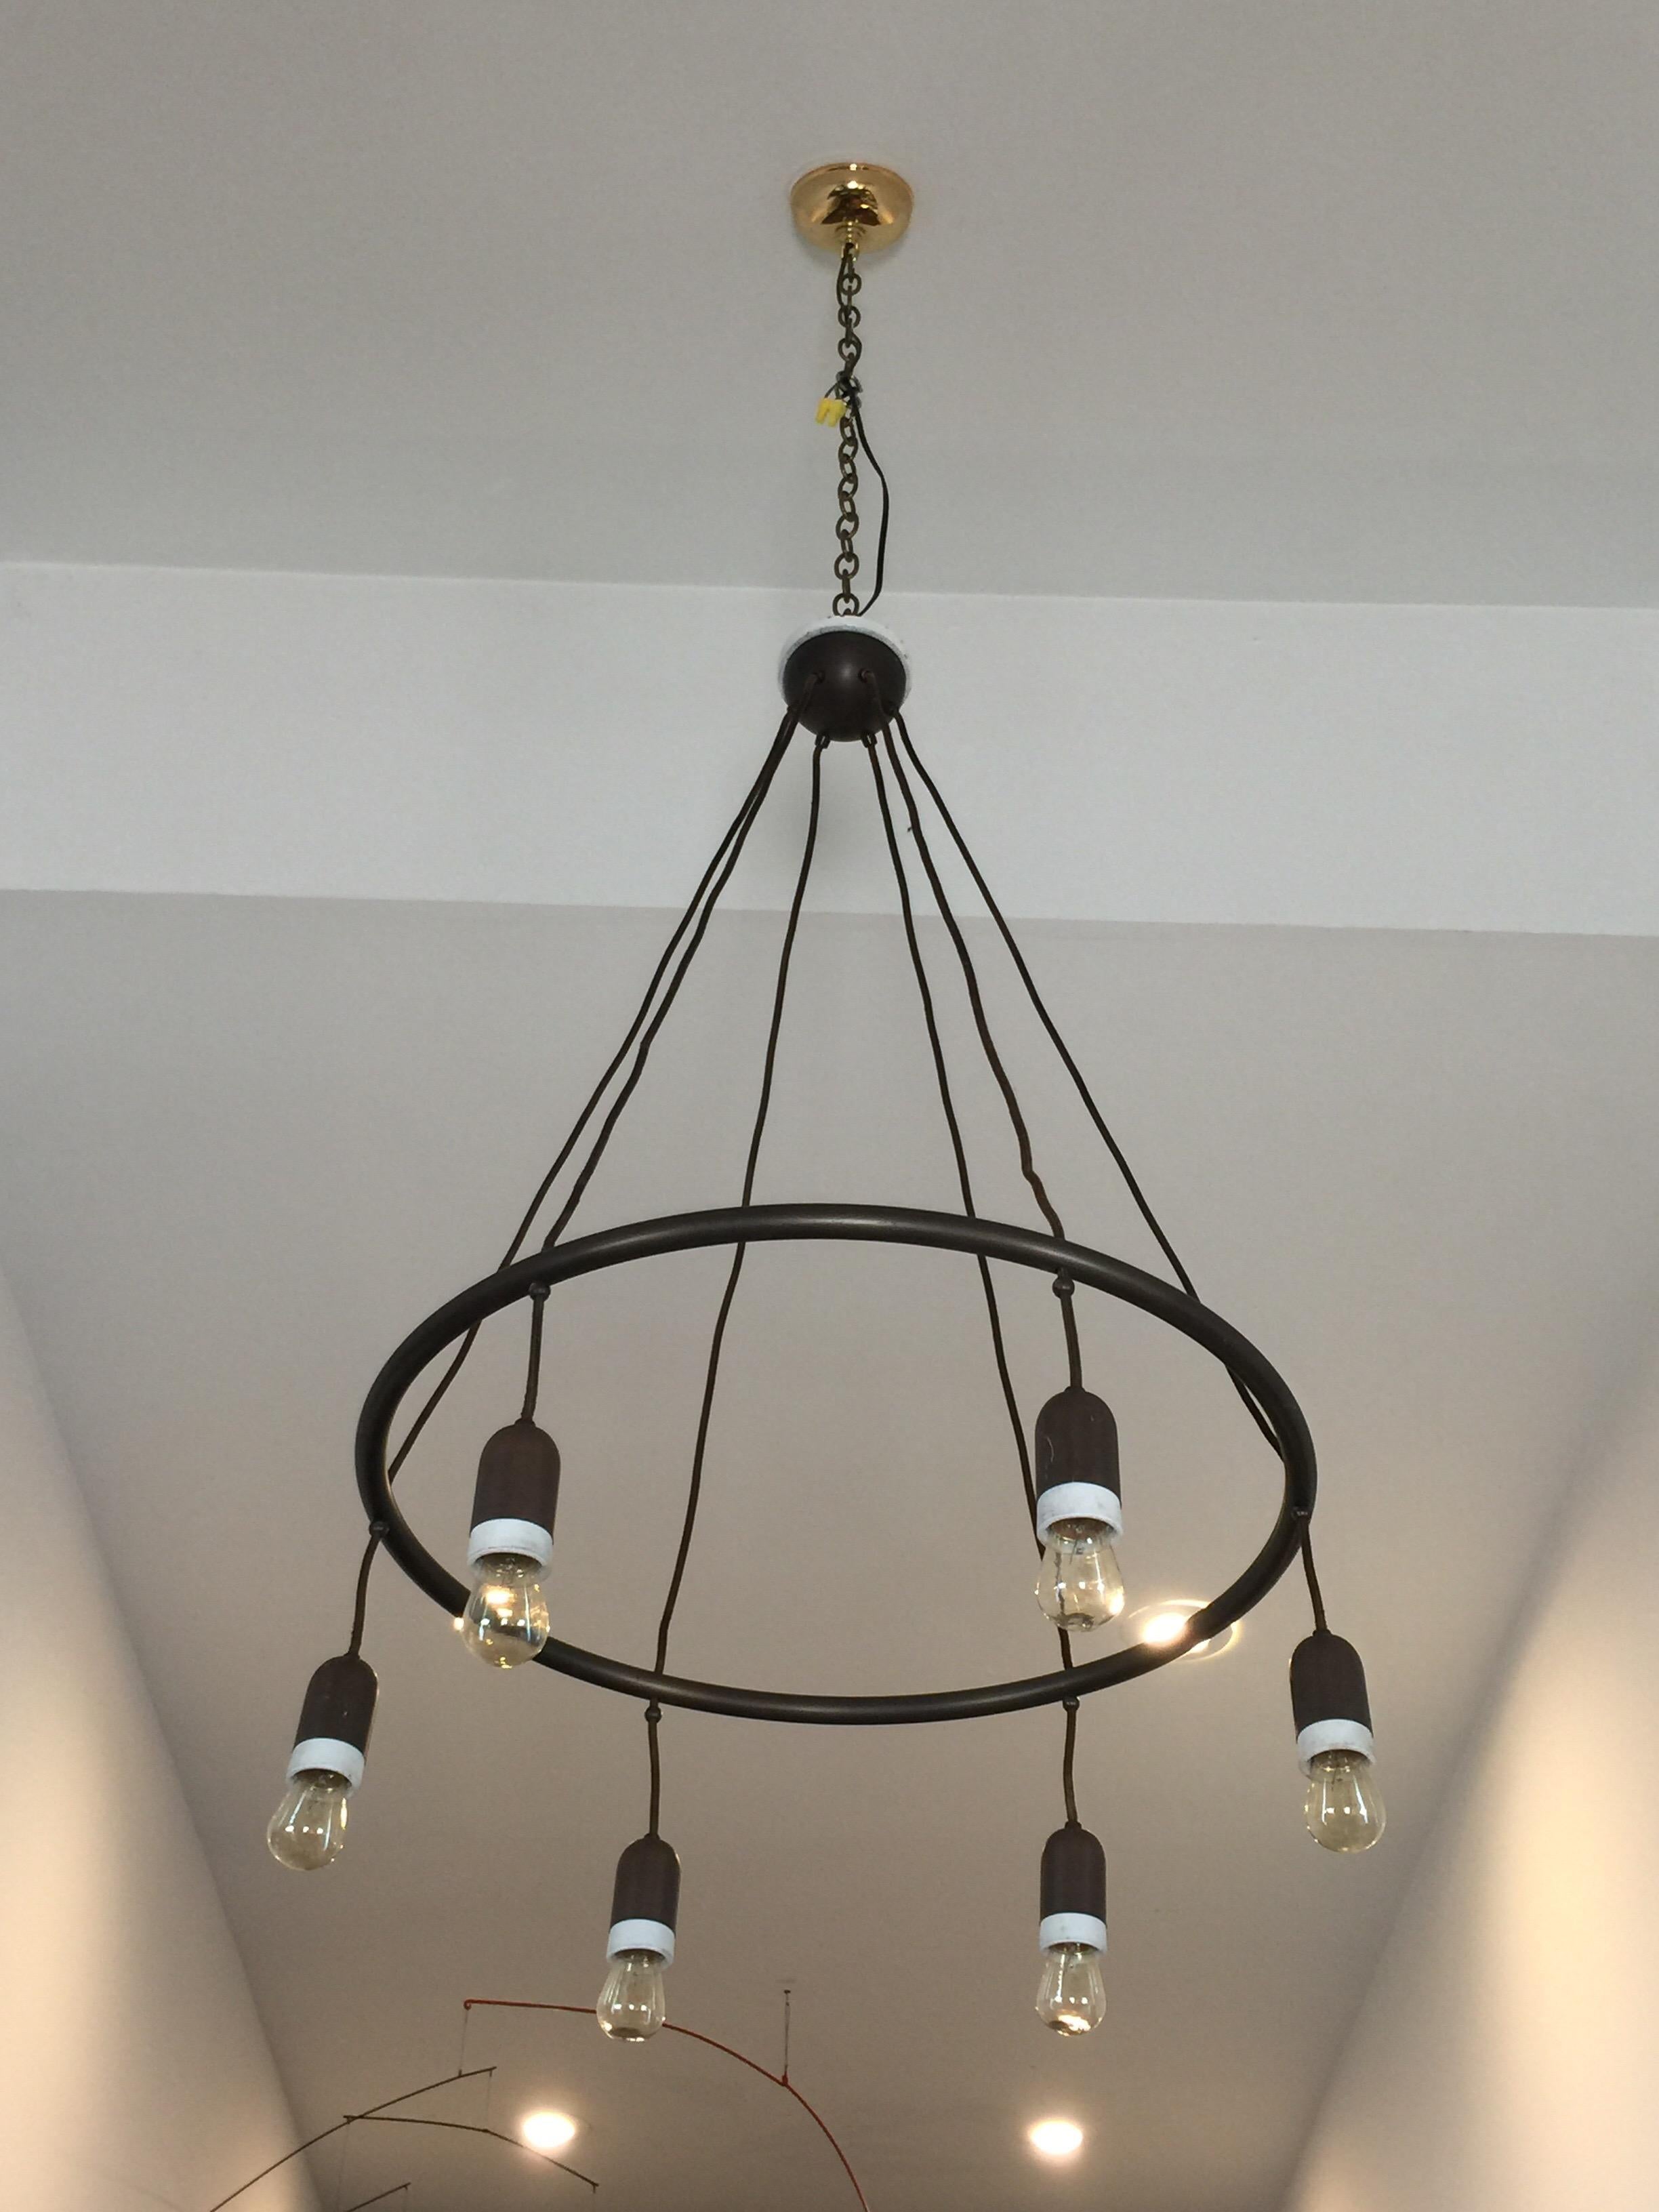 Patinated 6 Light Adolf Loos Ring Hanging Chandelier For Sale